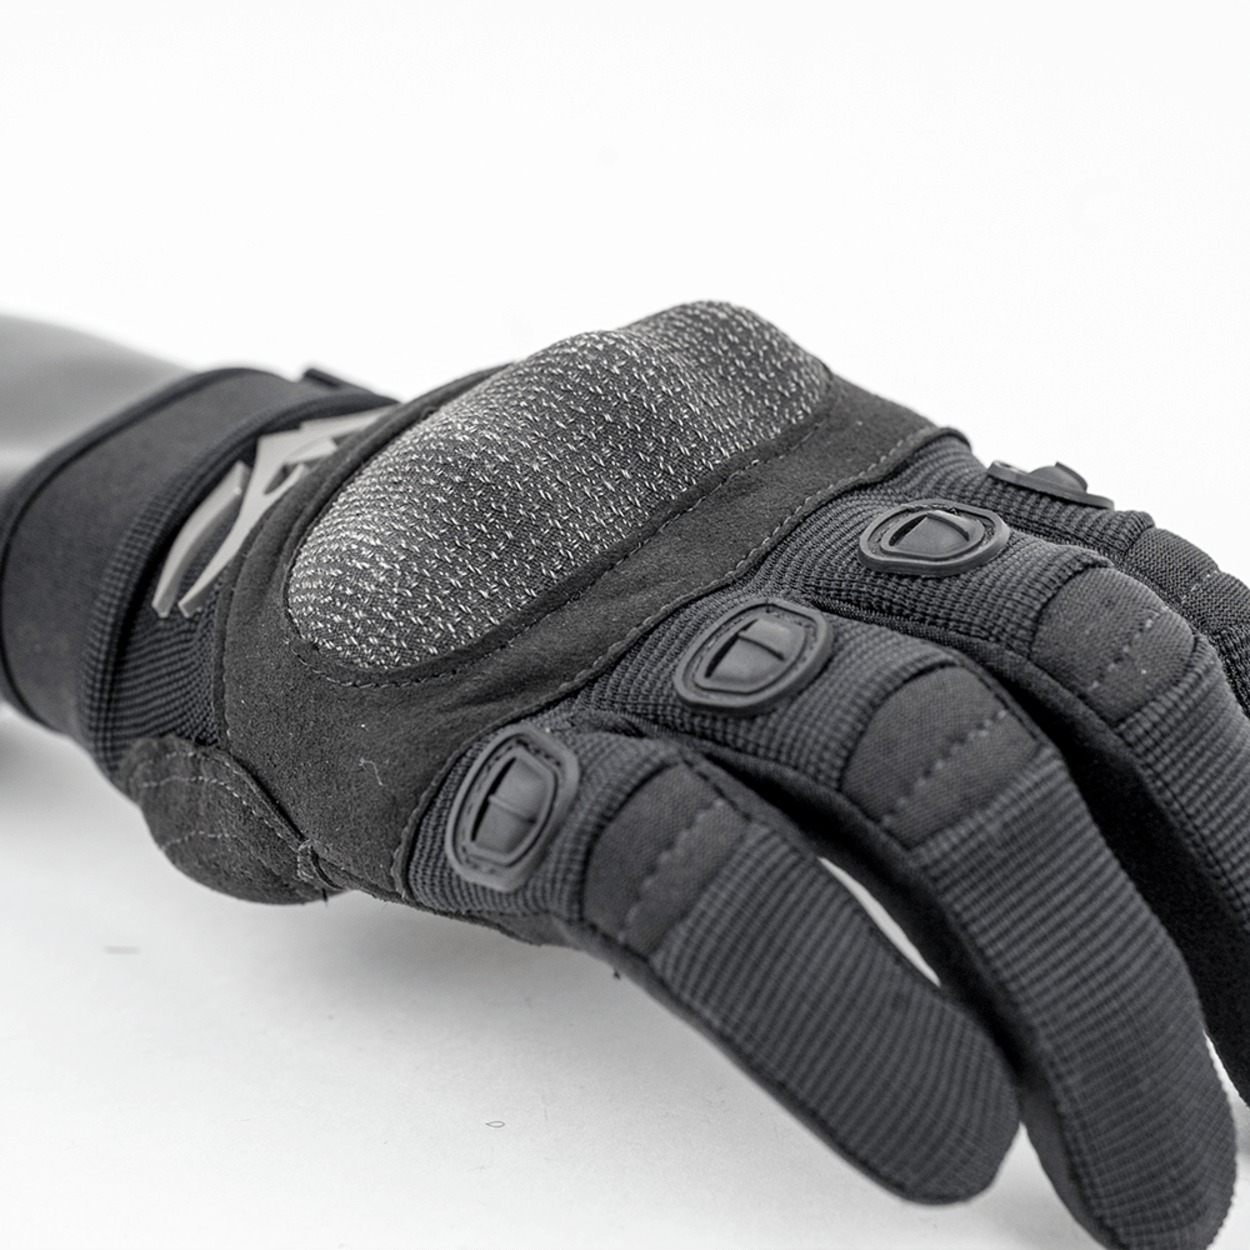 Zulu Gloves - TAN - Eminent Paintball And Airsoft